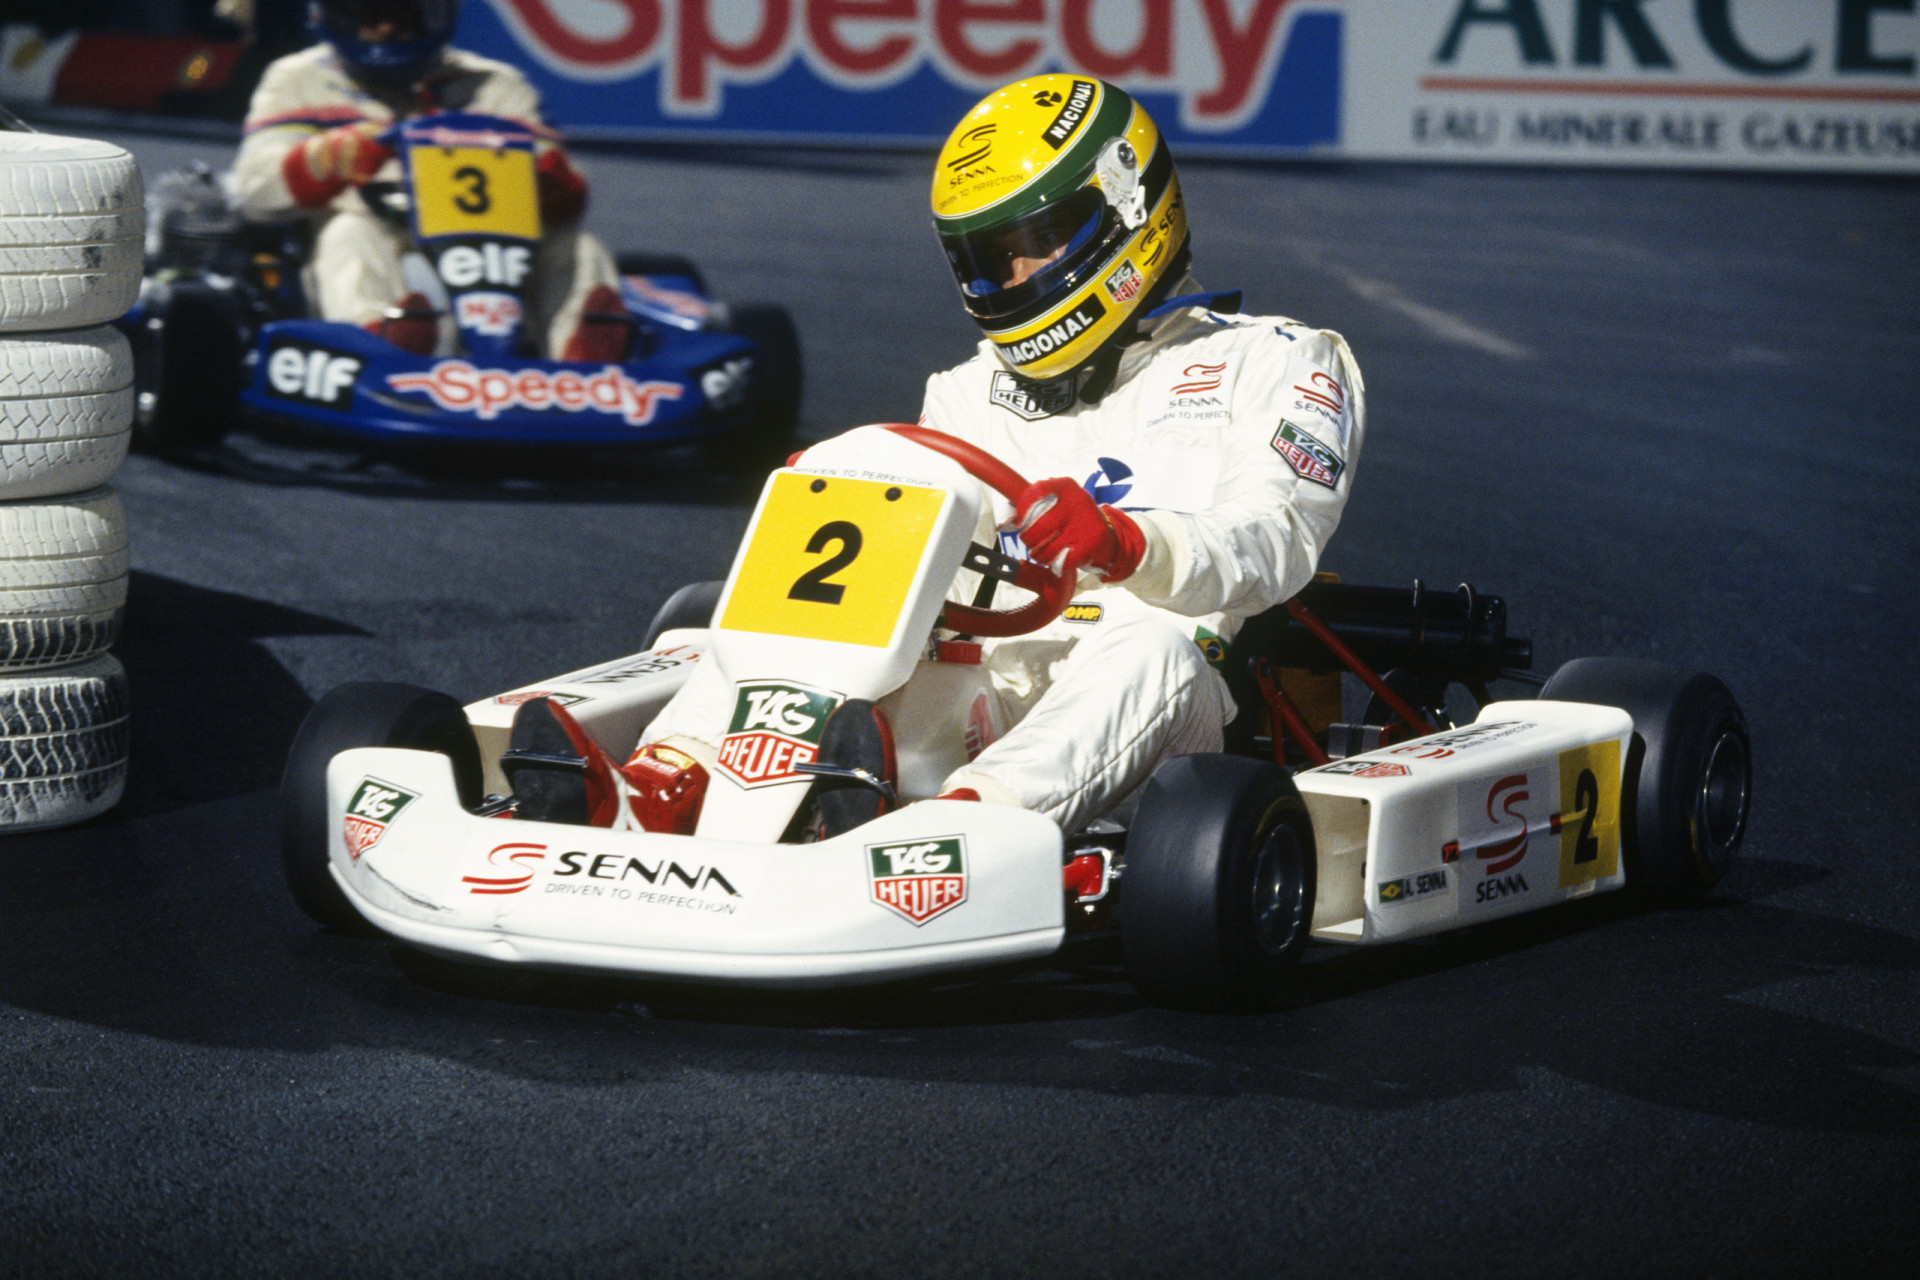 <p>Senna discovered his love of racing at the age of four when his father introduced him to the world of go-karting. The budding driver began racing as soon as he was legally allowed, at age 13. He went on to win the South American Kart Championship in 1977, and contested the Karting World Championship each year from 1978 to 1982, finishing runner-up in 1979 and 1980. He's pictured here in 1993 taking part in the Masters Karting event at Bercy, Paris.</p><p>You may also like:<a href="https://www.starsinsider.com/n/213250?utm_source=msn.com&utm_medium=display&utm_campaign=referral_description&utm_content=703485en-us"> The world's scariest animals </a></p>